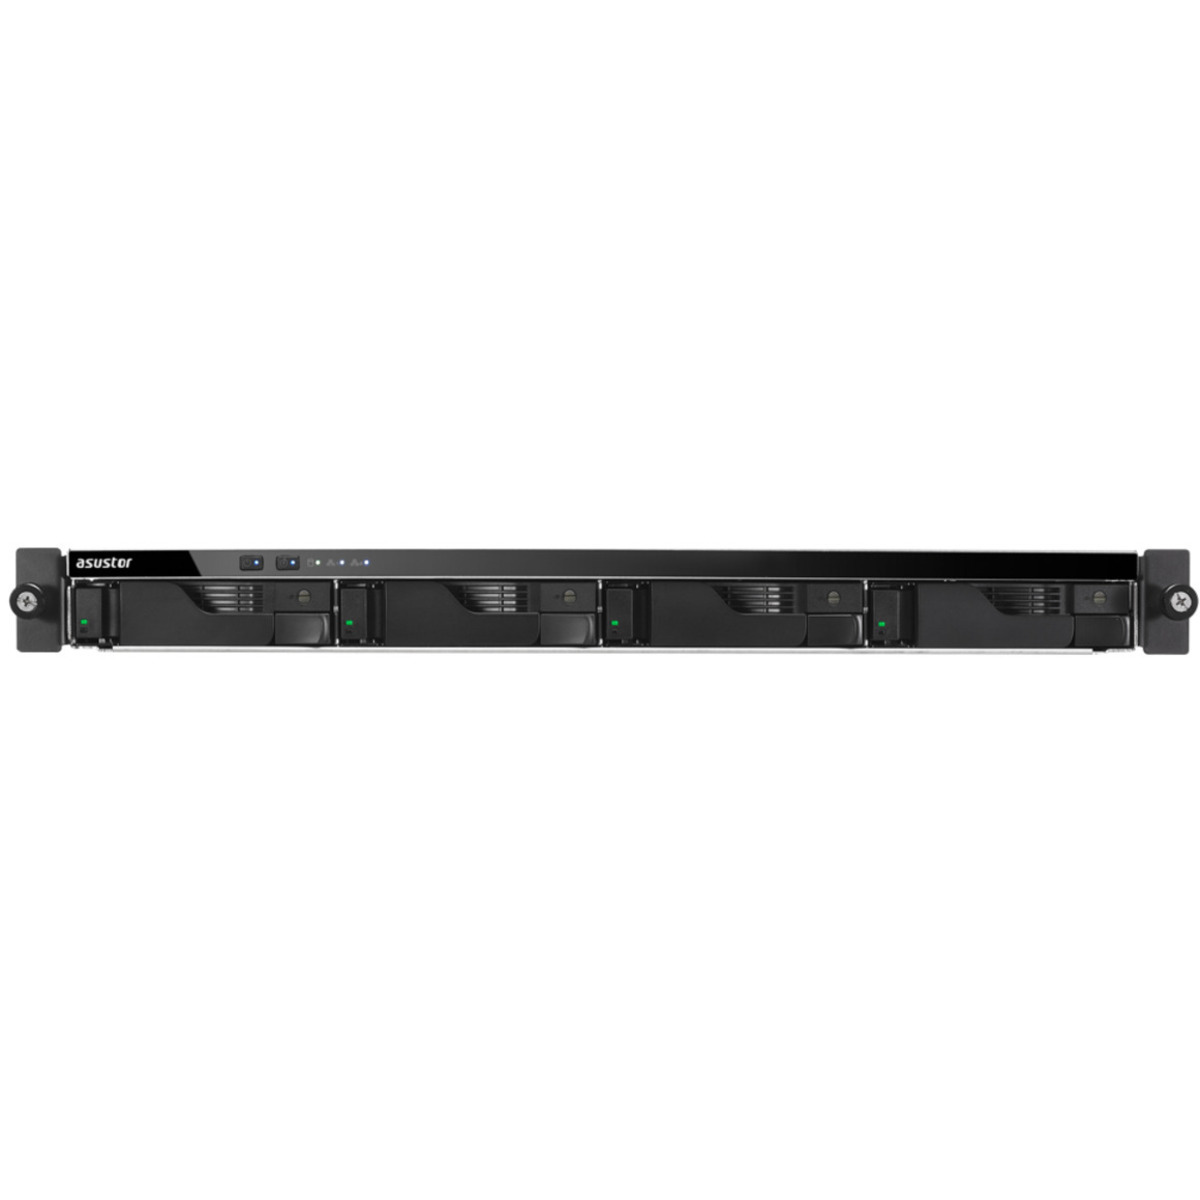 ASUSTOR LOCKERSTOR 4RS AS6504RS 8tb 4-Bay RackMount Multimedia / Power User / Business NAS - Network Attached Storage Device 4x2tb Western Digital Red Pro WD2002FFSX 3.5 7200rpm SATA 6Gb/s HDD NAS Class Drives Installed - Burn-In Tested - FREE RAM UPGRADE LOCKERSTOR 4RS AS6504RS